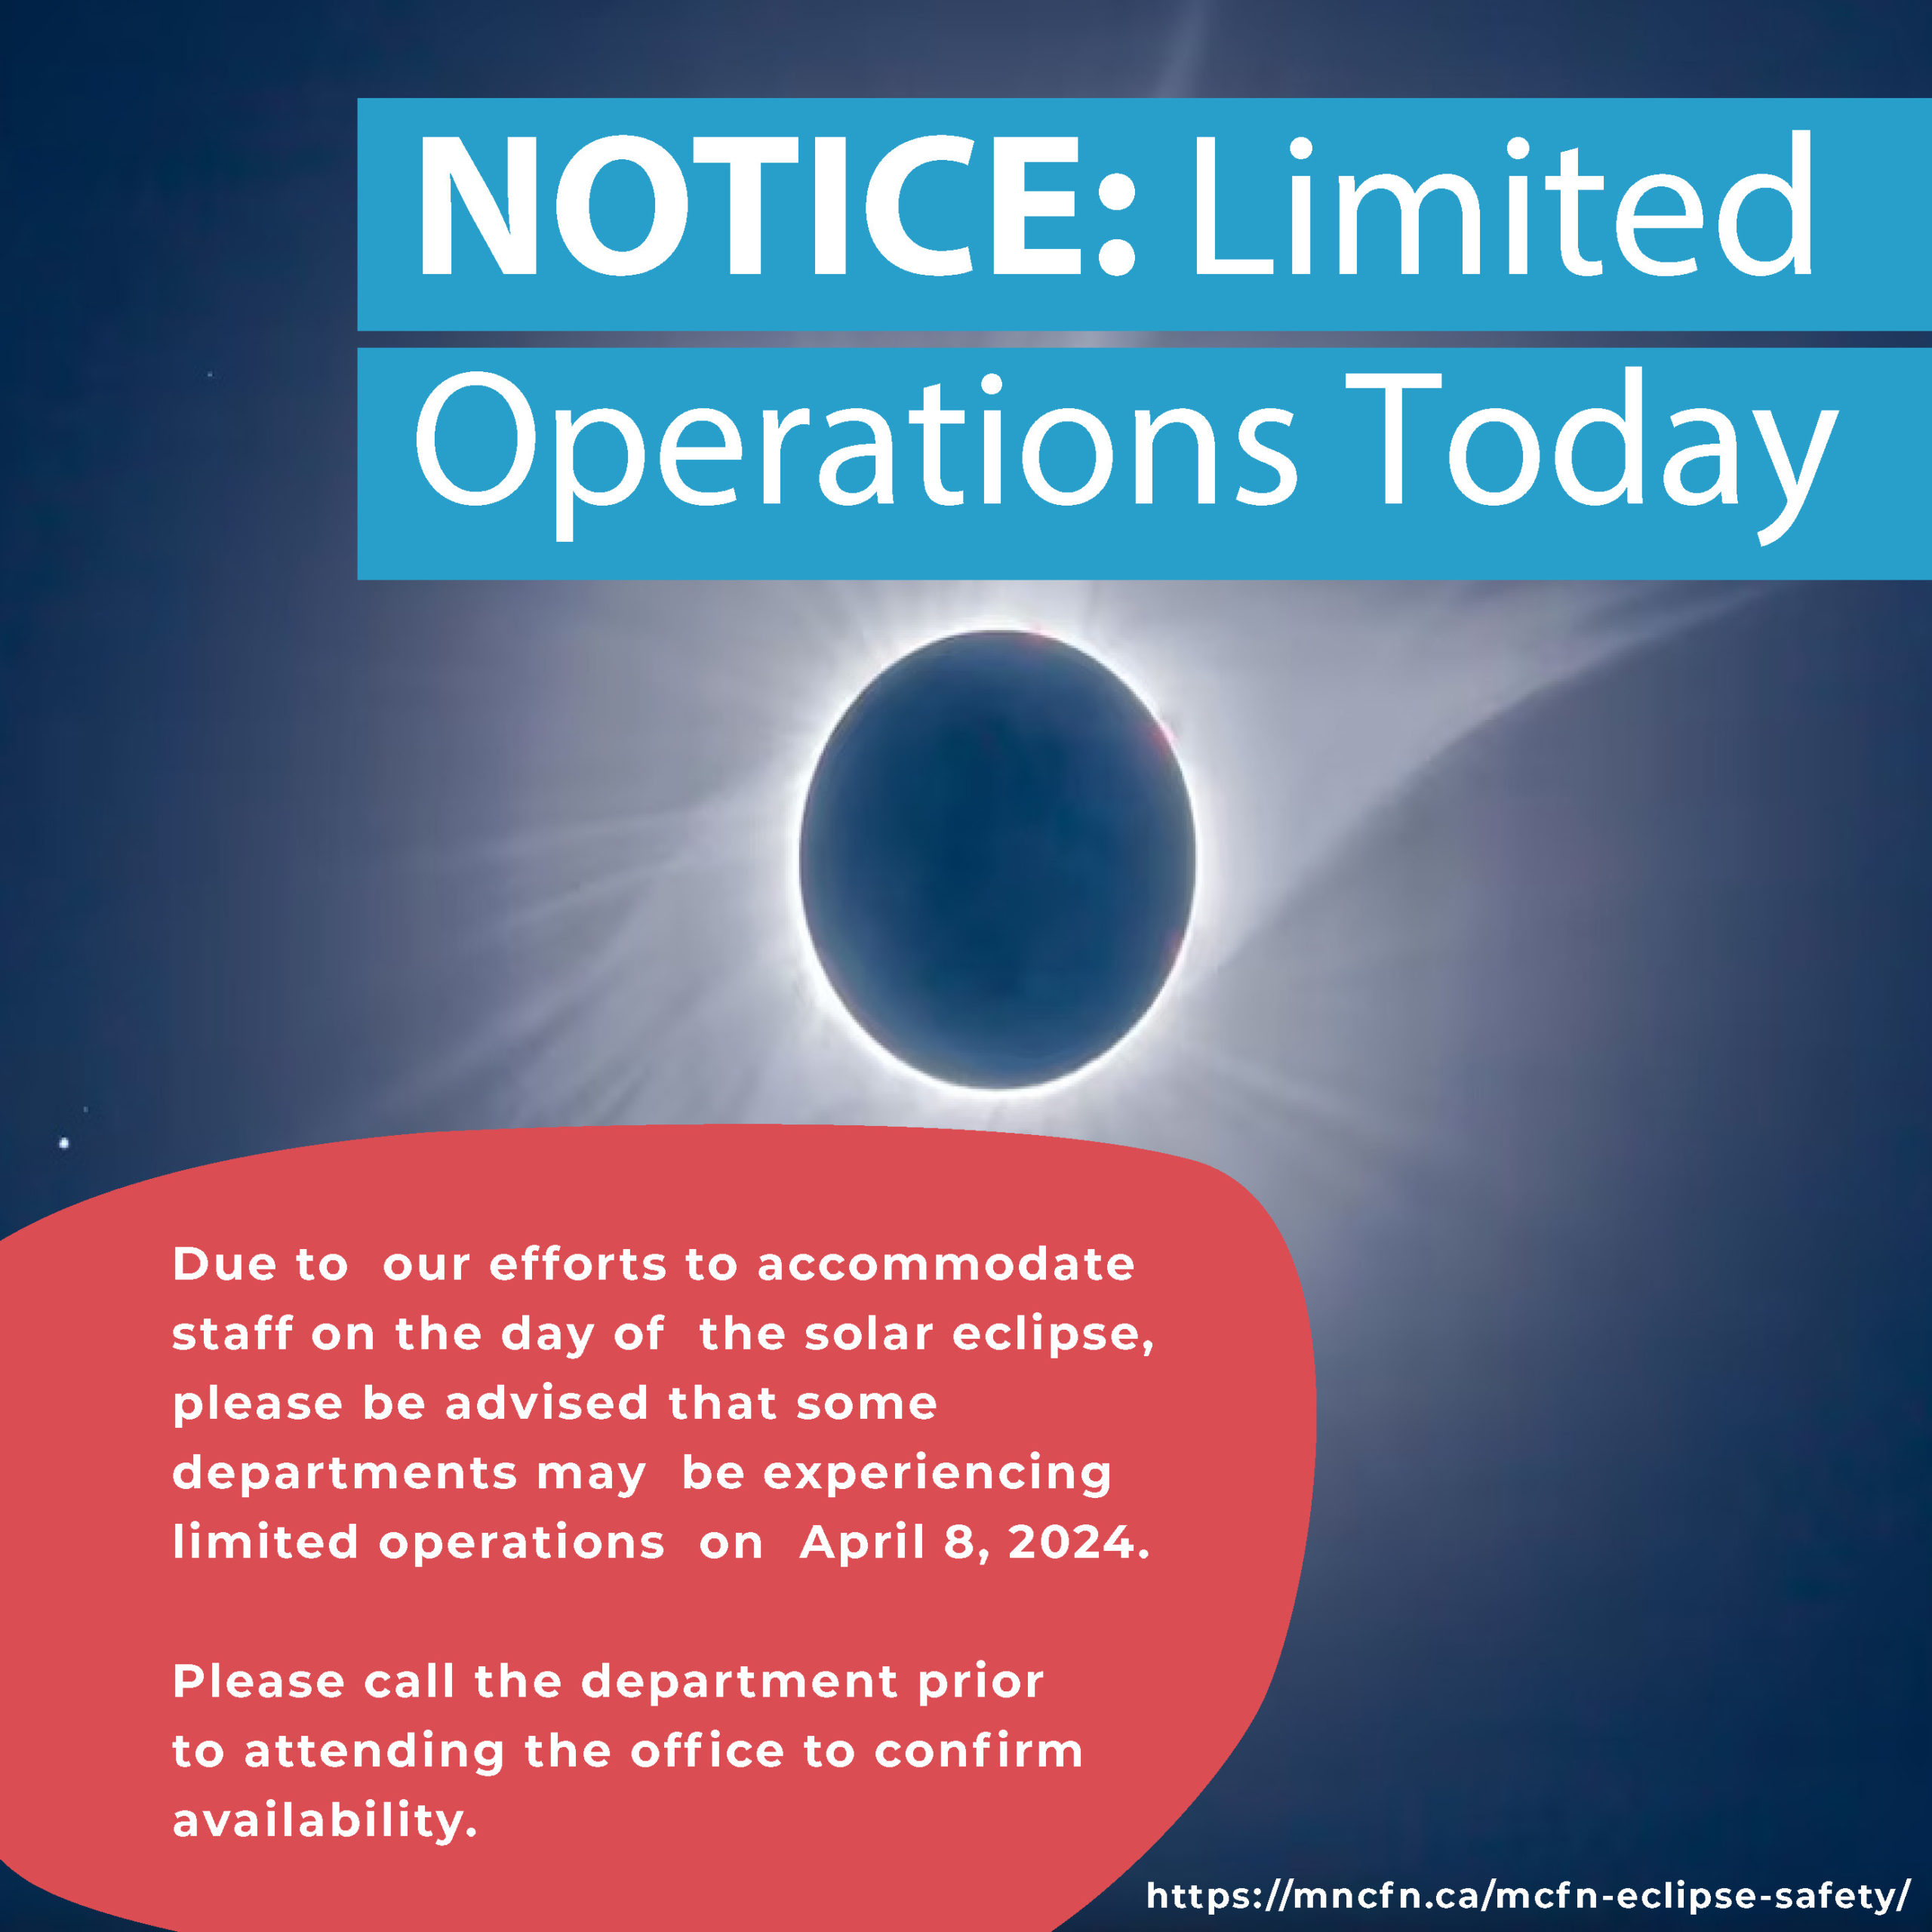 NOTICE: Limited Operations